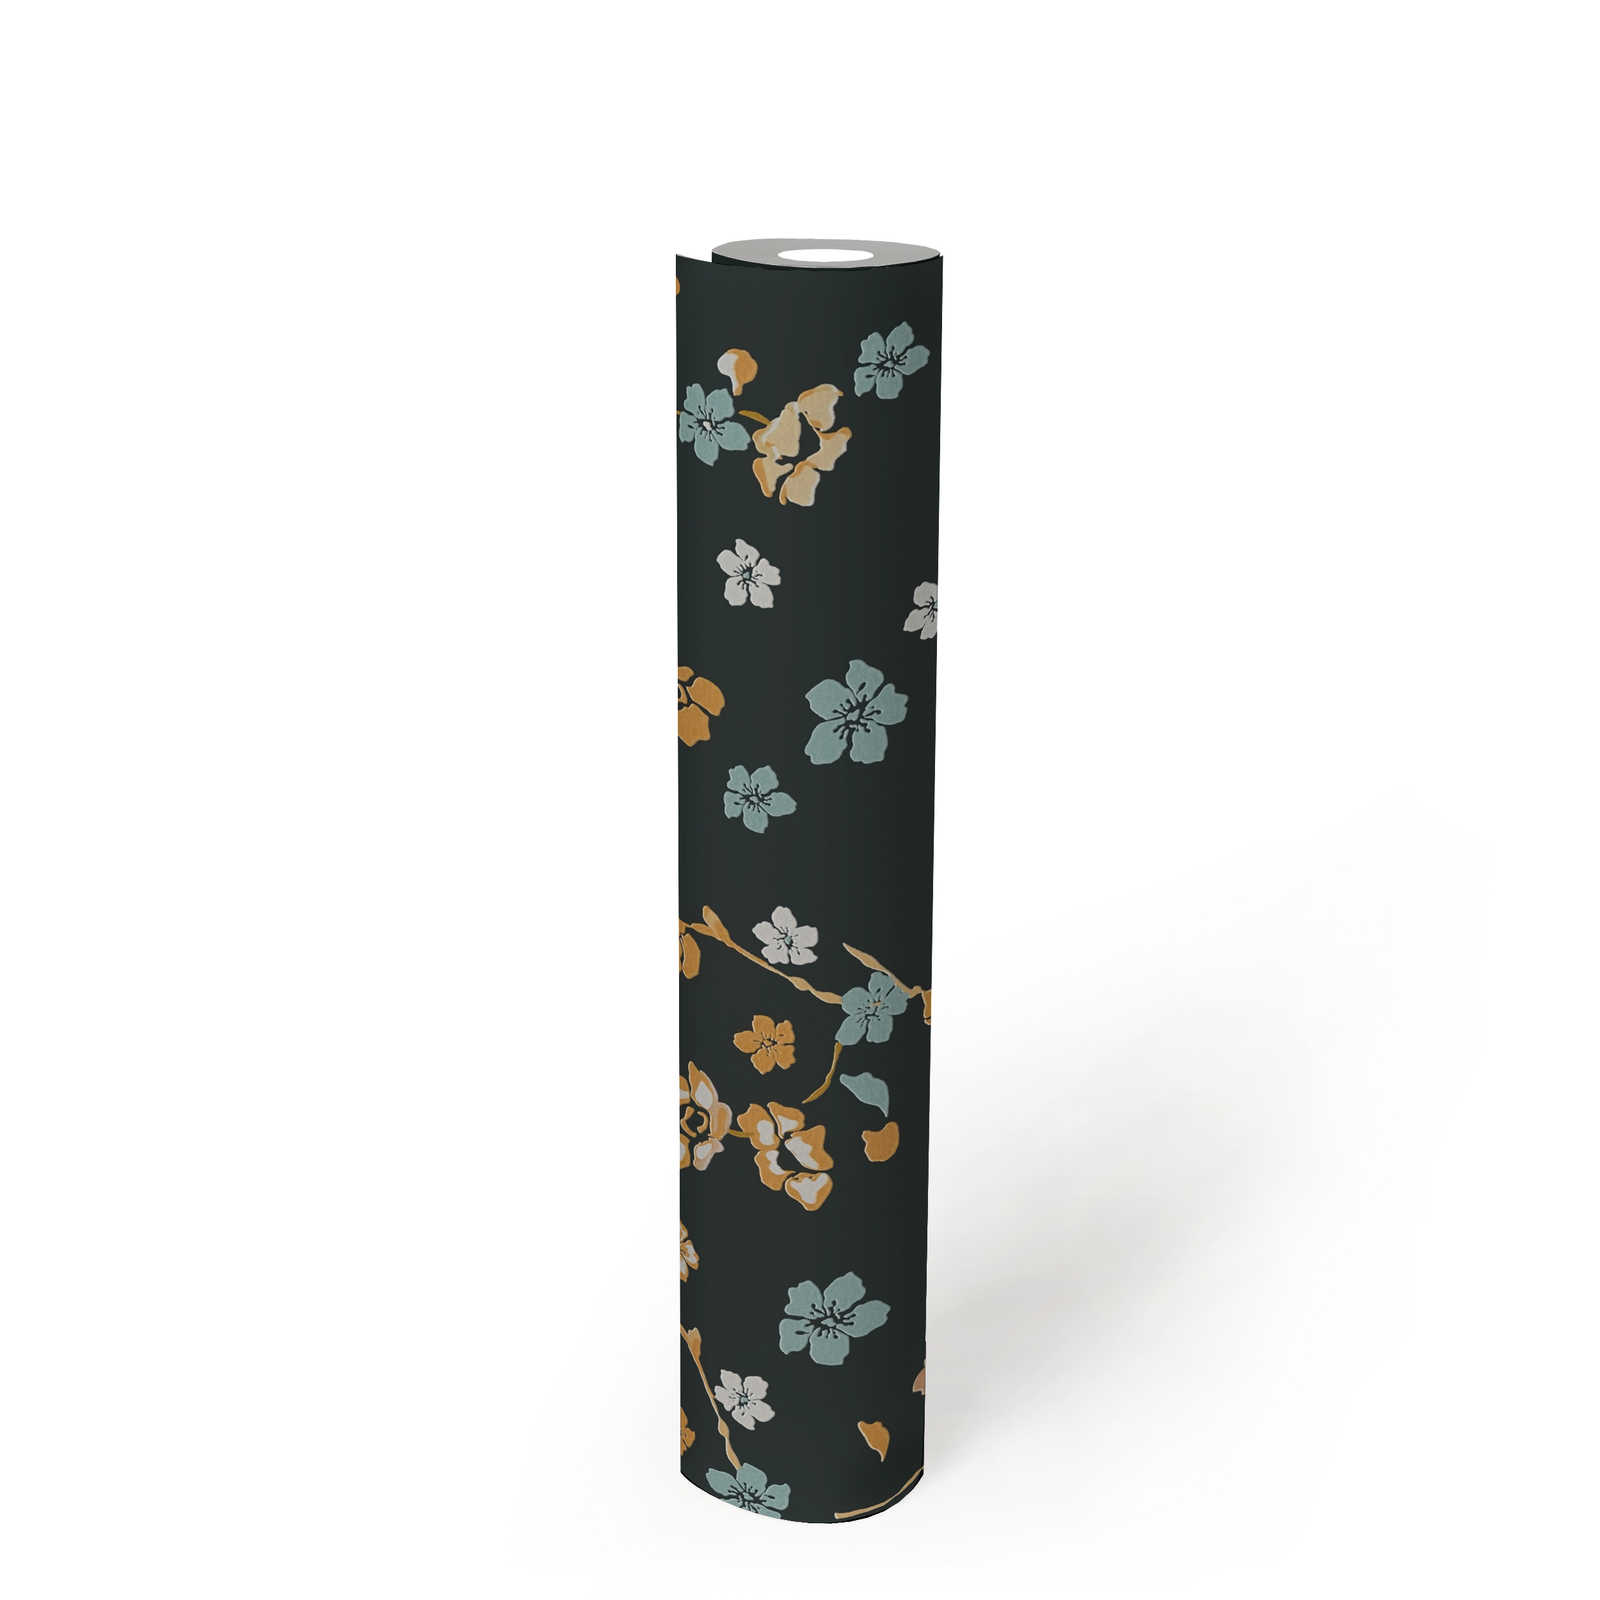             Floral wallpaper with glossy effect & textured pattern - black, gold, turquoise
        